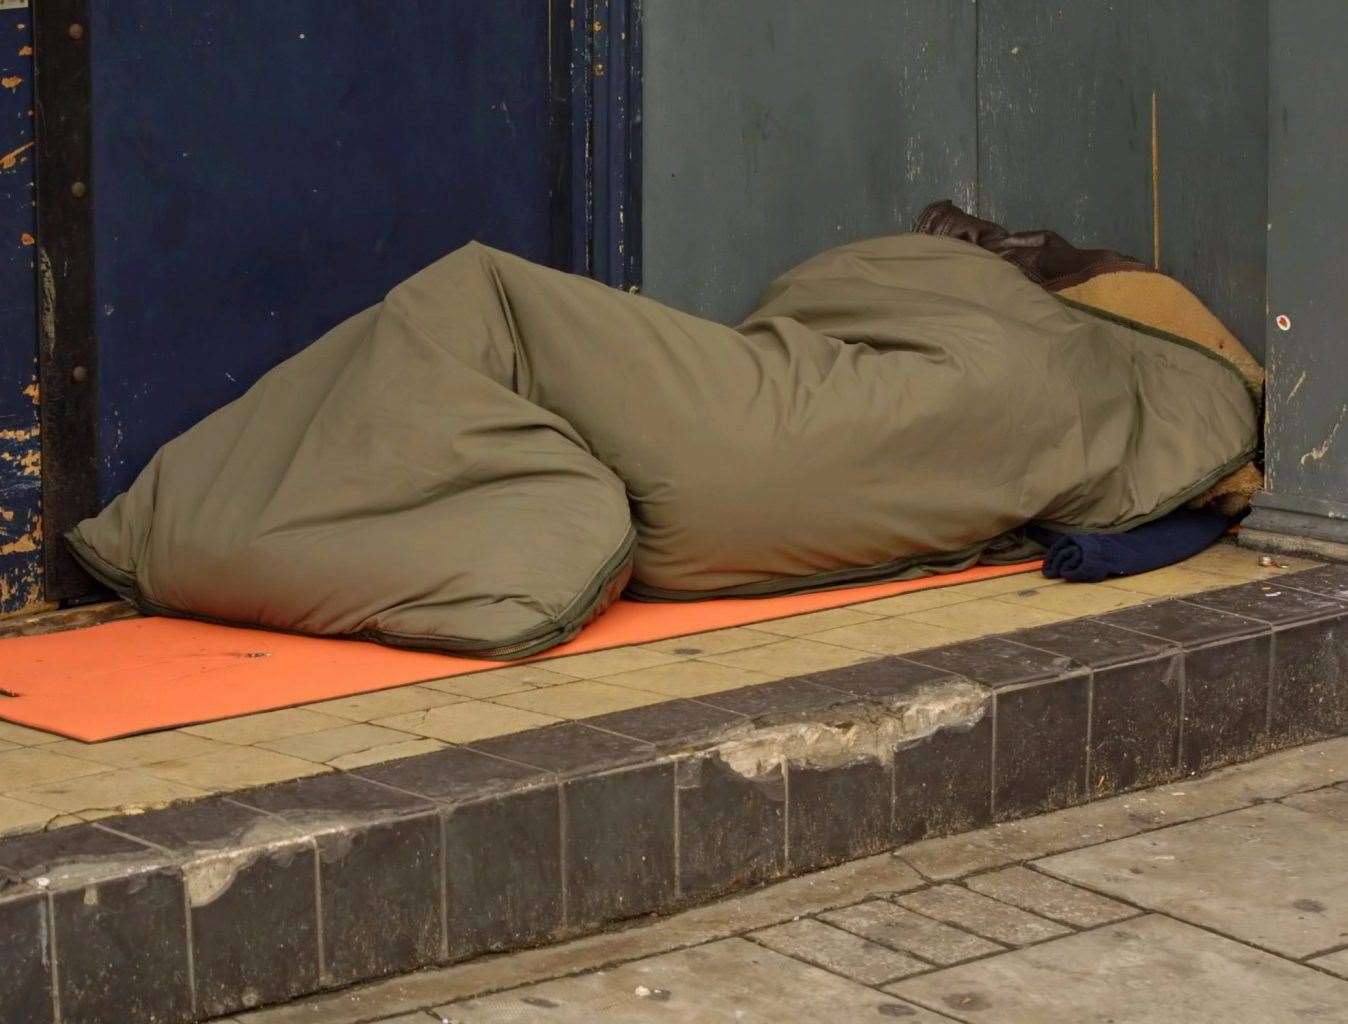 People sleeping rough often have to resort to begging. Stock image